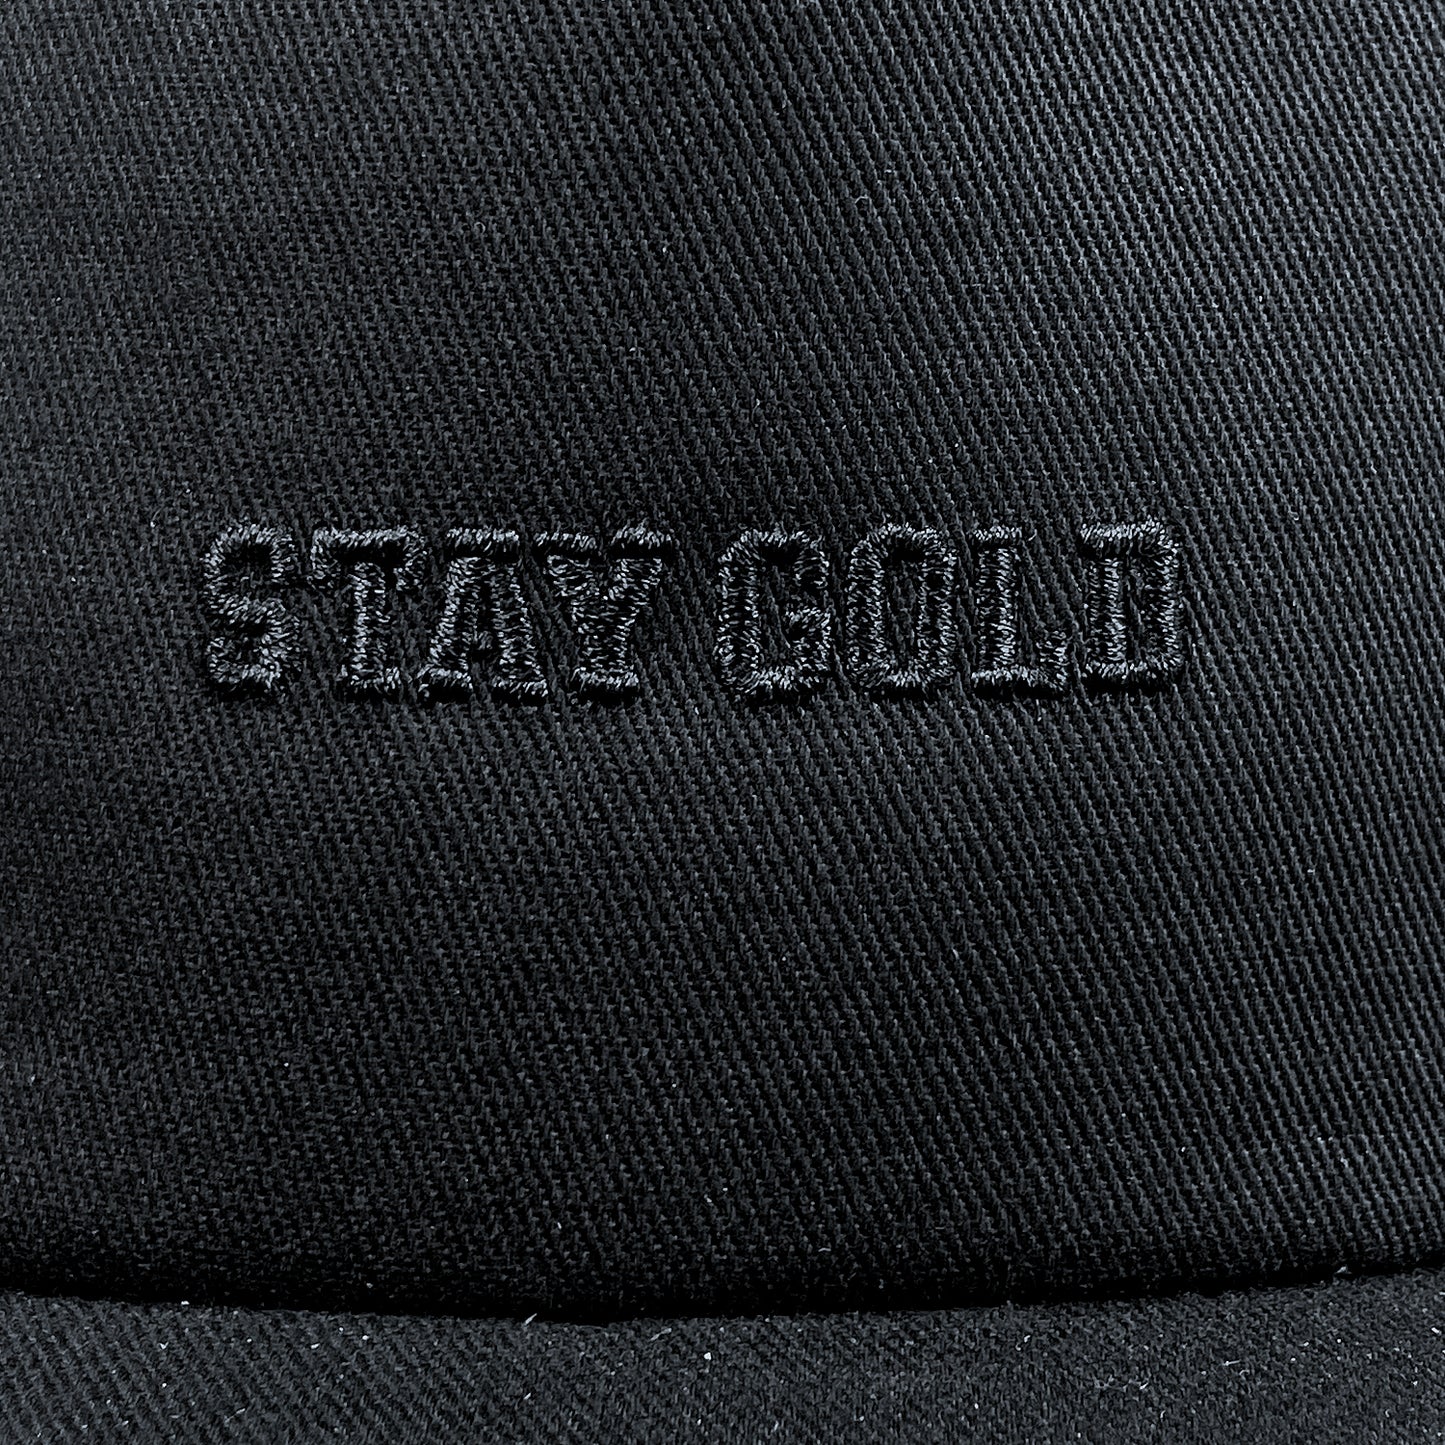 Stay Gold Black Out Hat